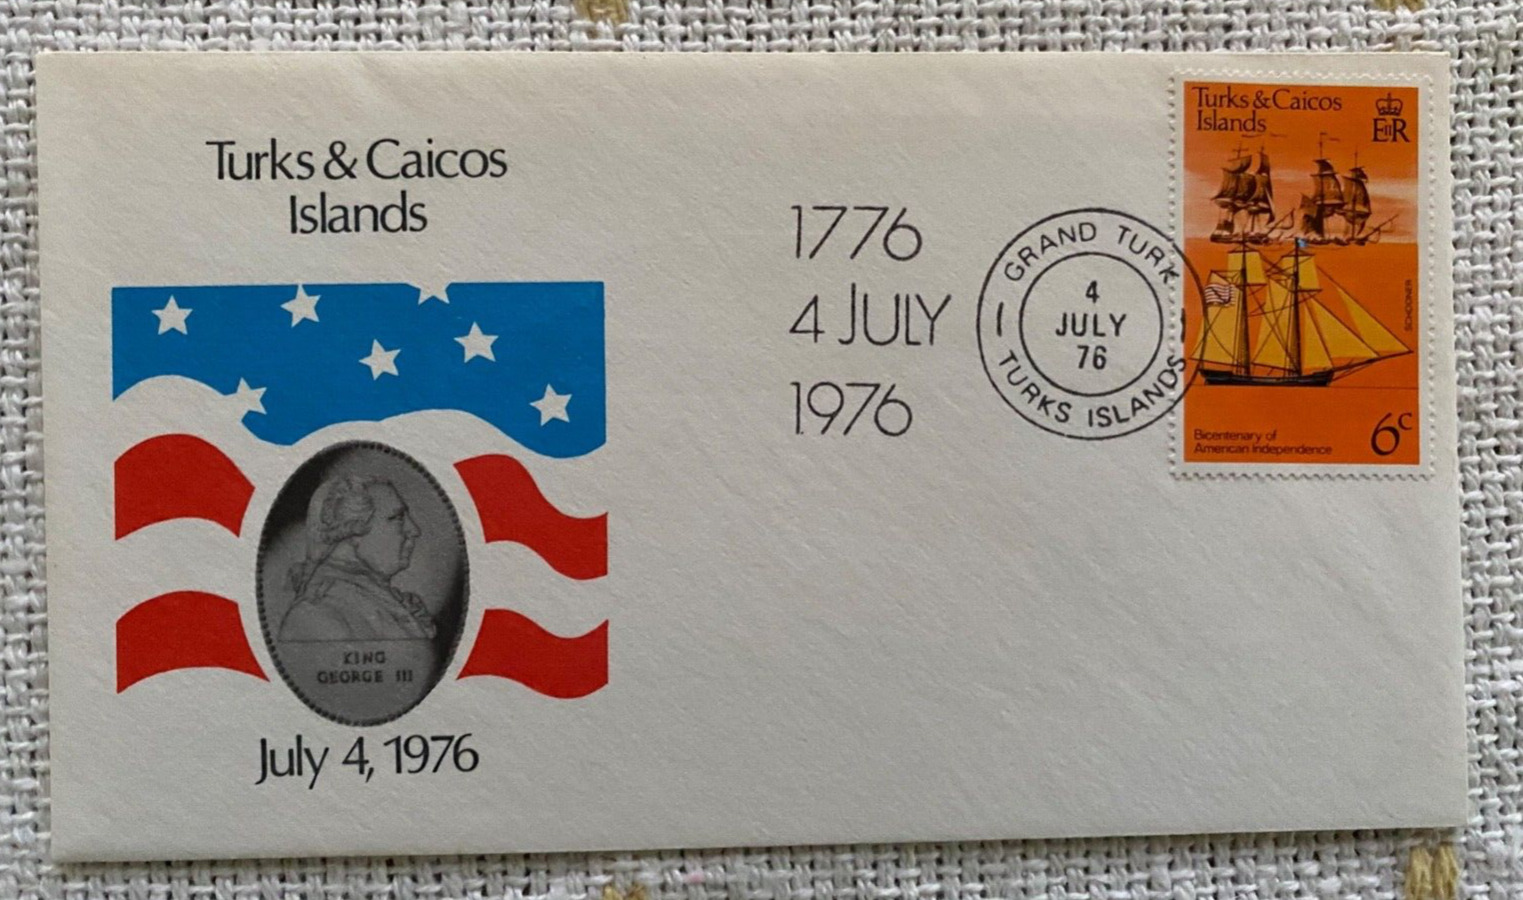 1776 4 July First Day Cover 1976 Turks And Caicos Islands. Pristine Condition.